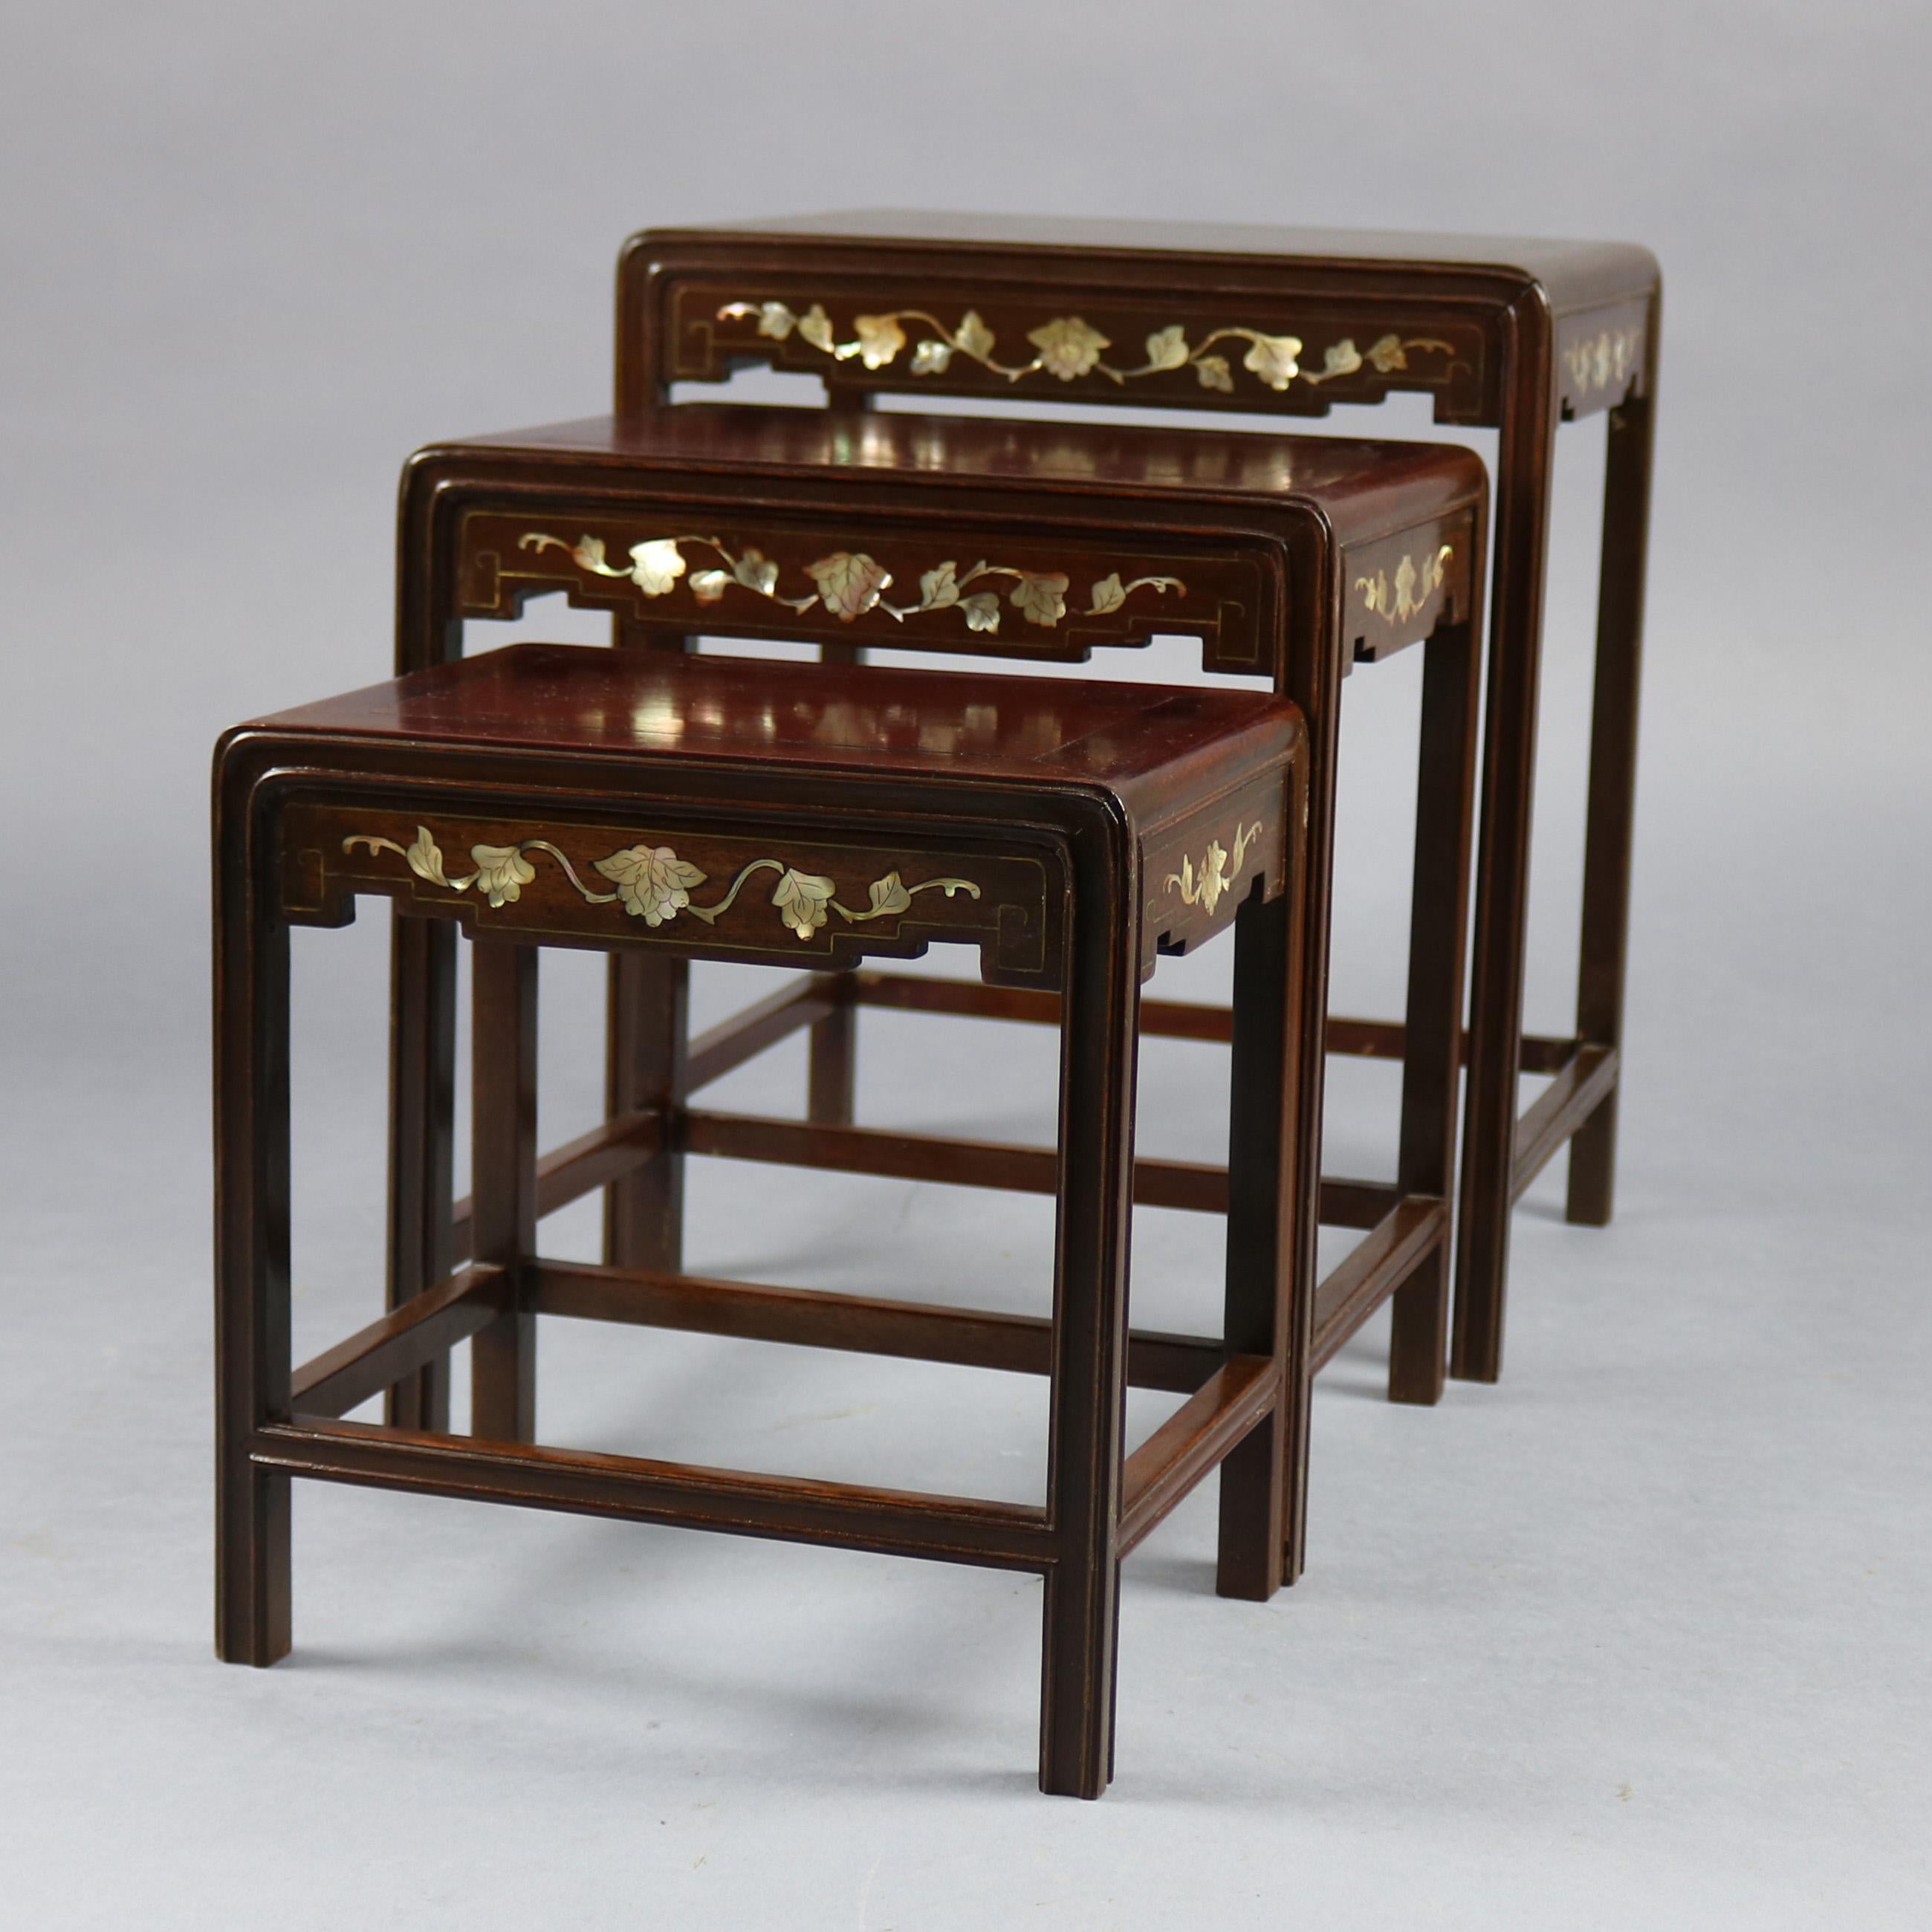 An antique chinoiserie nesting table set offers three graduated hardwood tables with mother of pearl inlaid floral decoration and incised gilt banding, 19th century

Measures: Little: 9.75